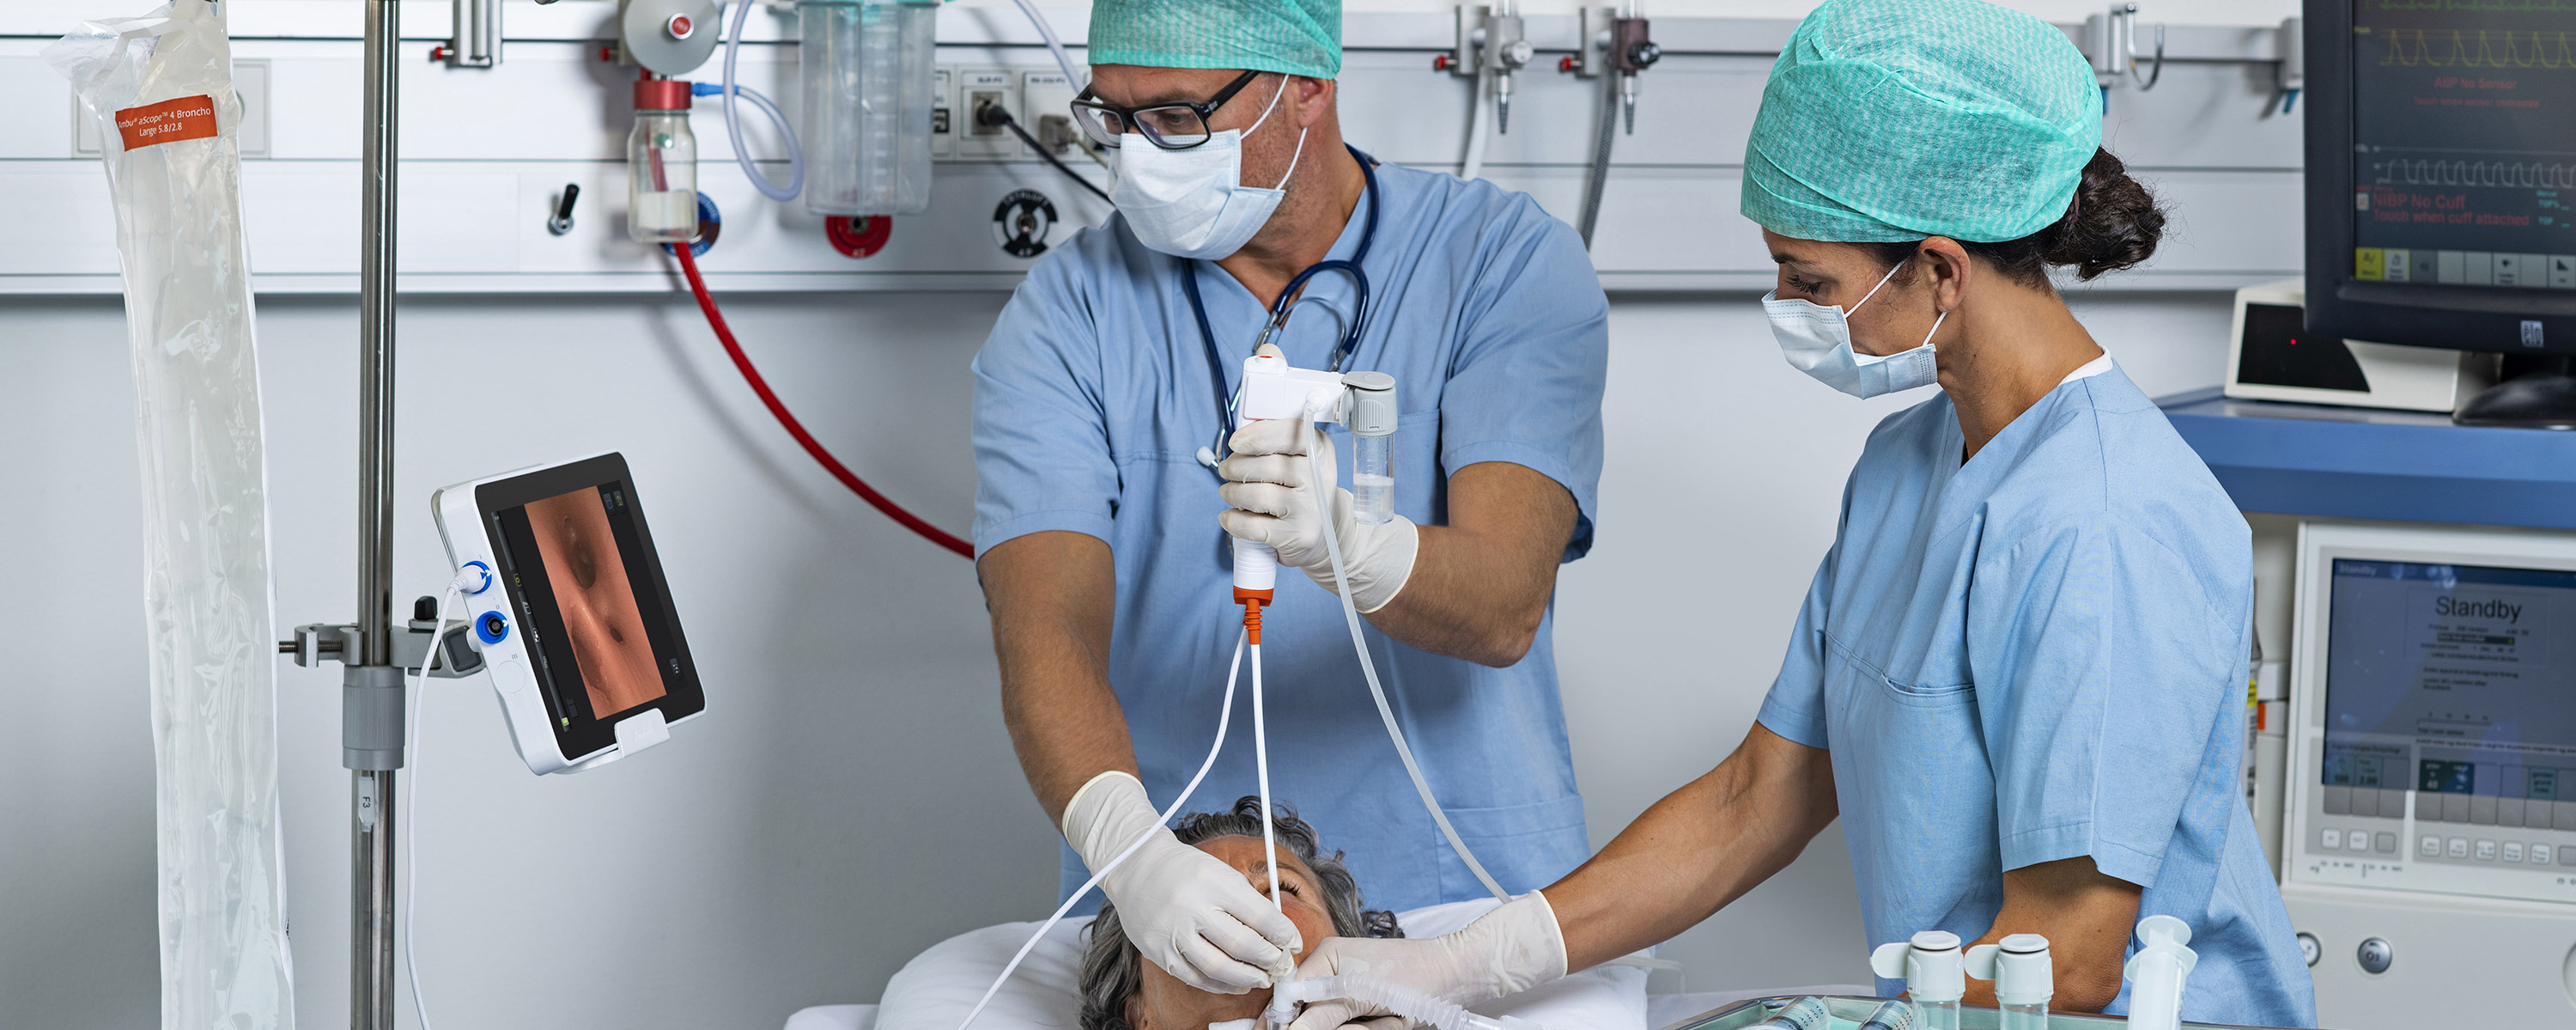 Single-use endoscopes are growing in popularity with evolving clinical needs and new technology.